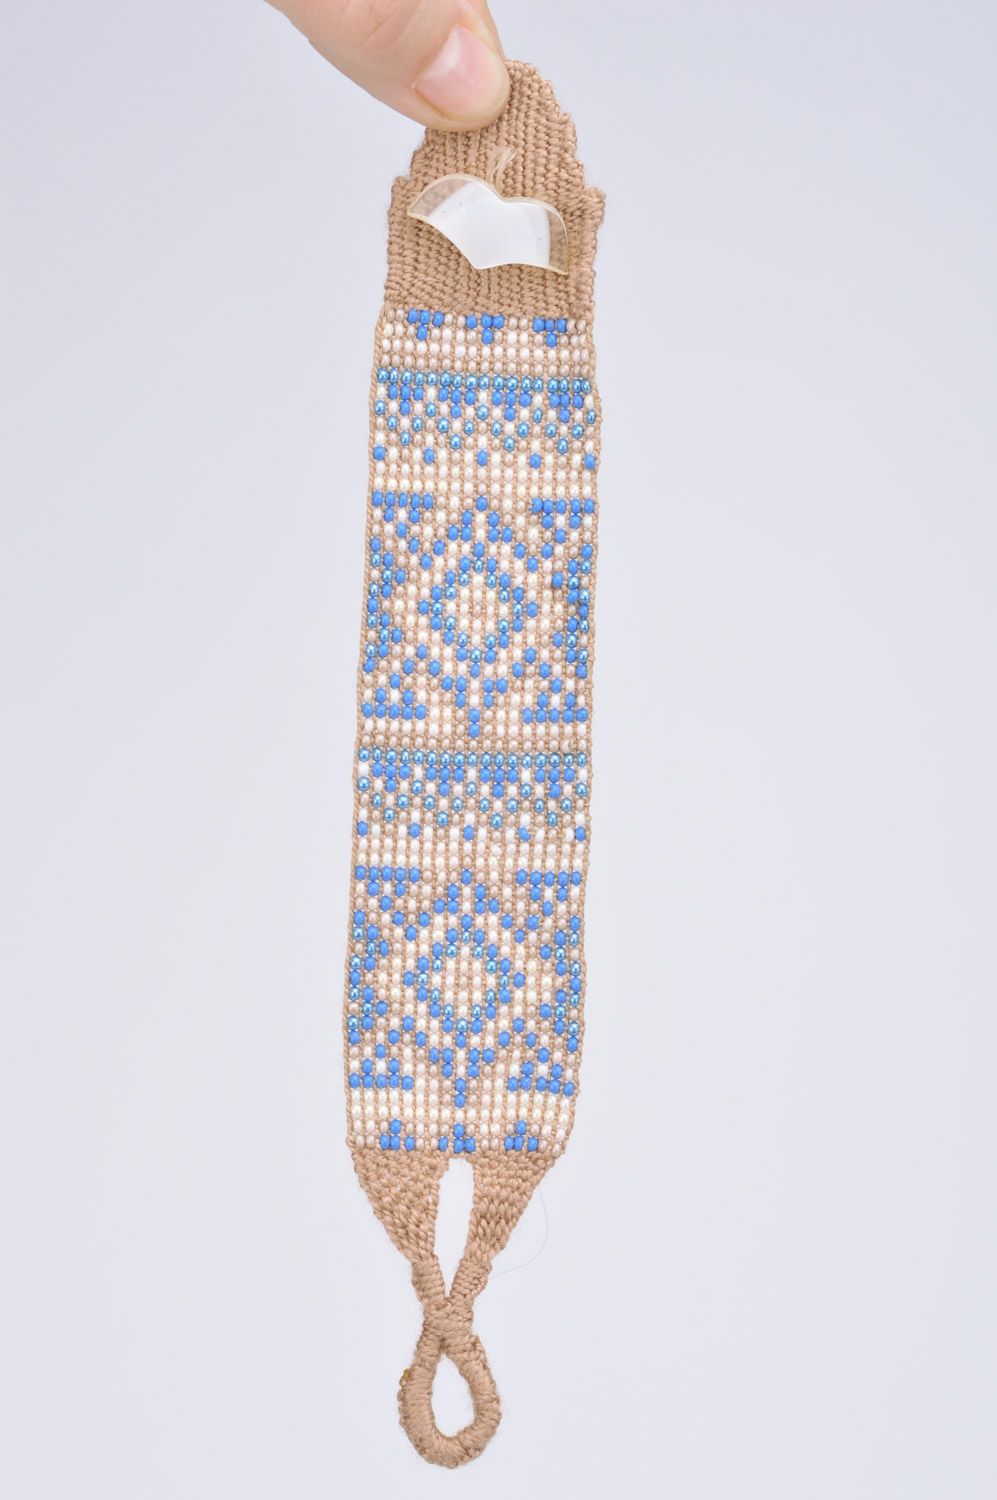 Handmade broad wrist bracelet woven of beige and blue beads with ornament photo 3